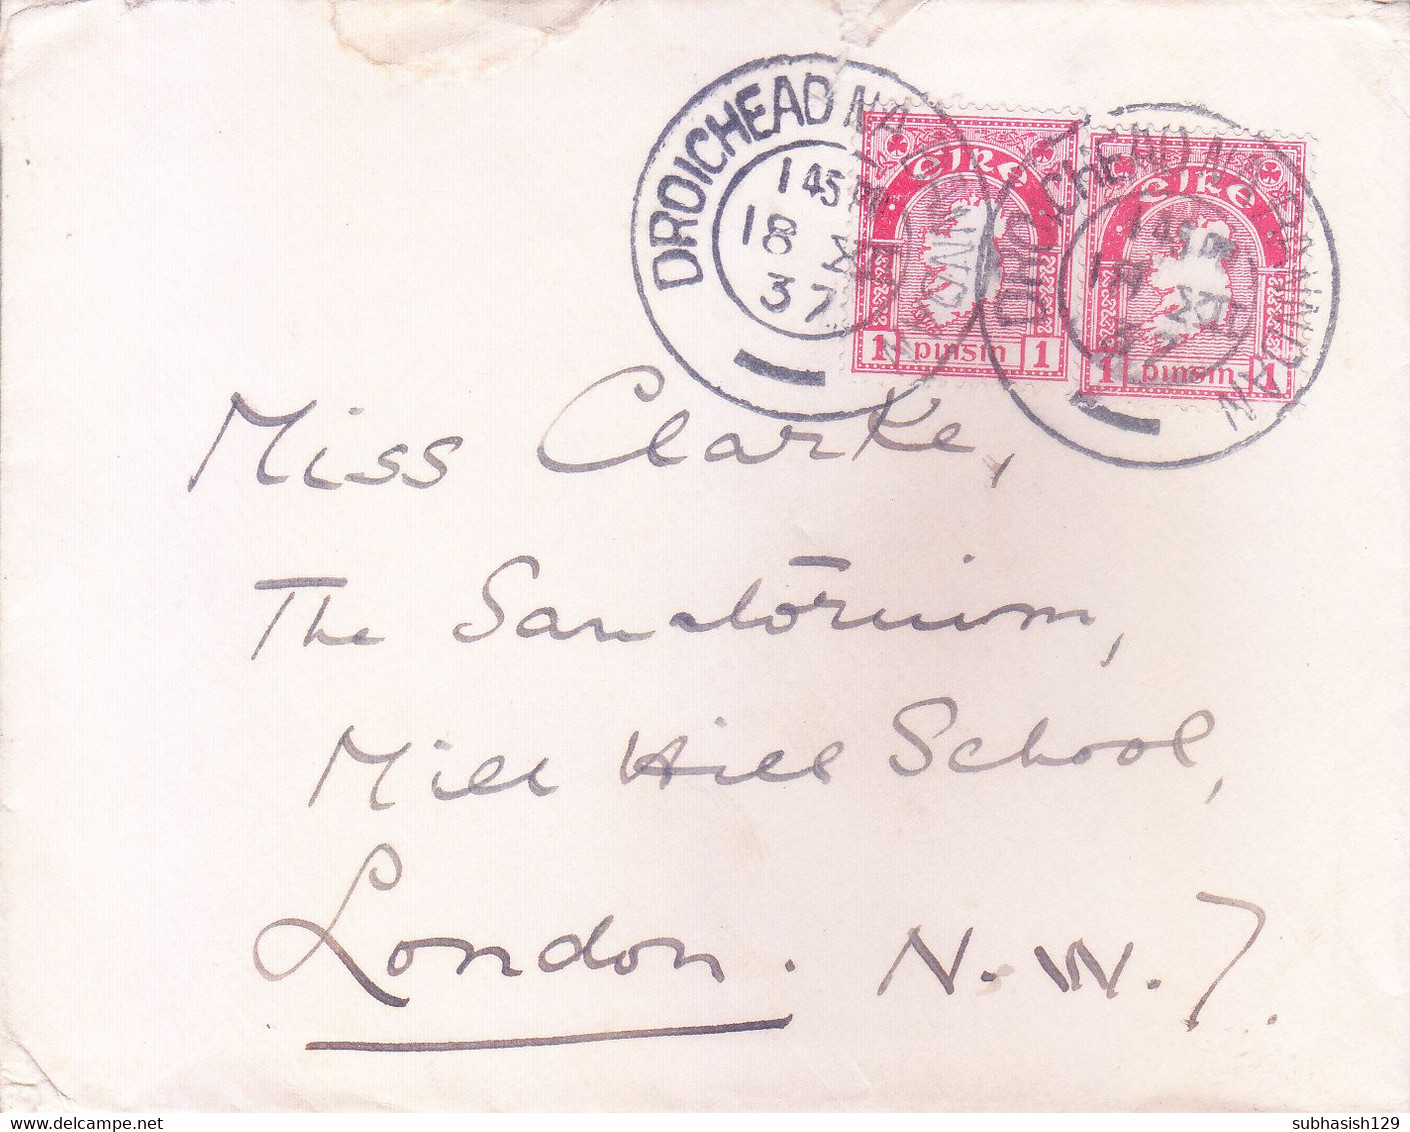 IRELAND : ENTIRE : YEAR 1937 : COVER POSTED FROM DROICHEAD NA RANNDAN FOR LONDON : USE OF 2v 1 PINSIN STAMPS - Storia Postale